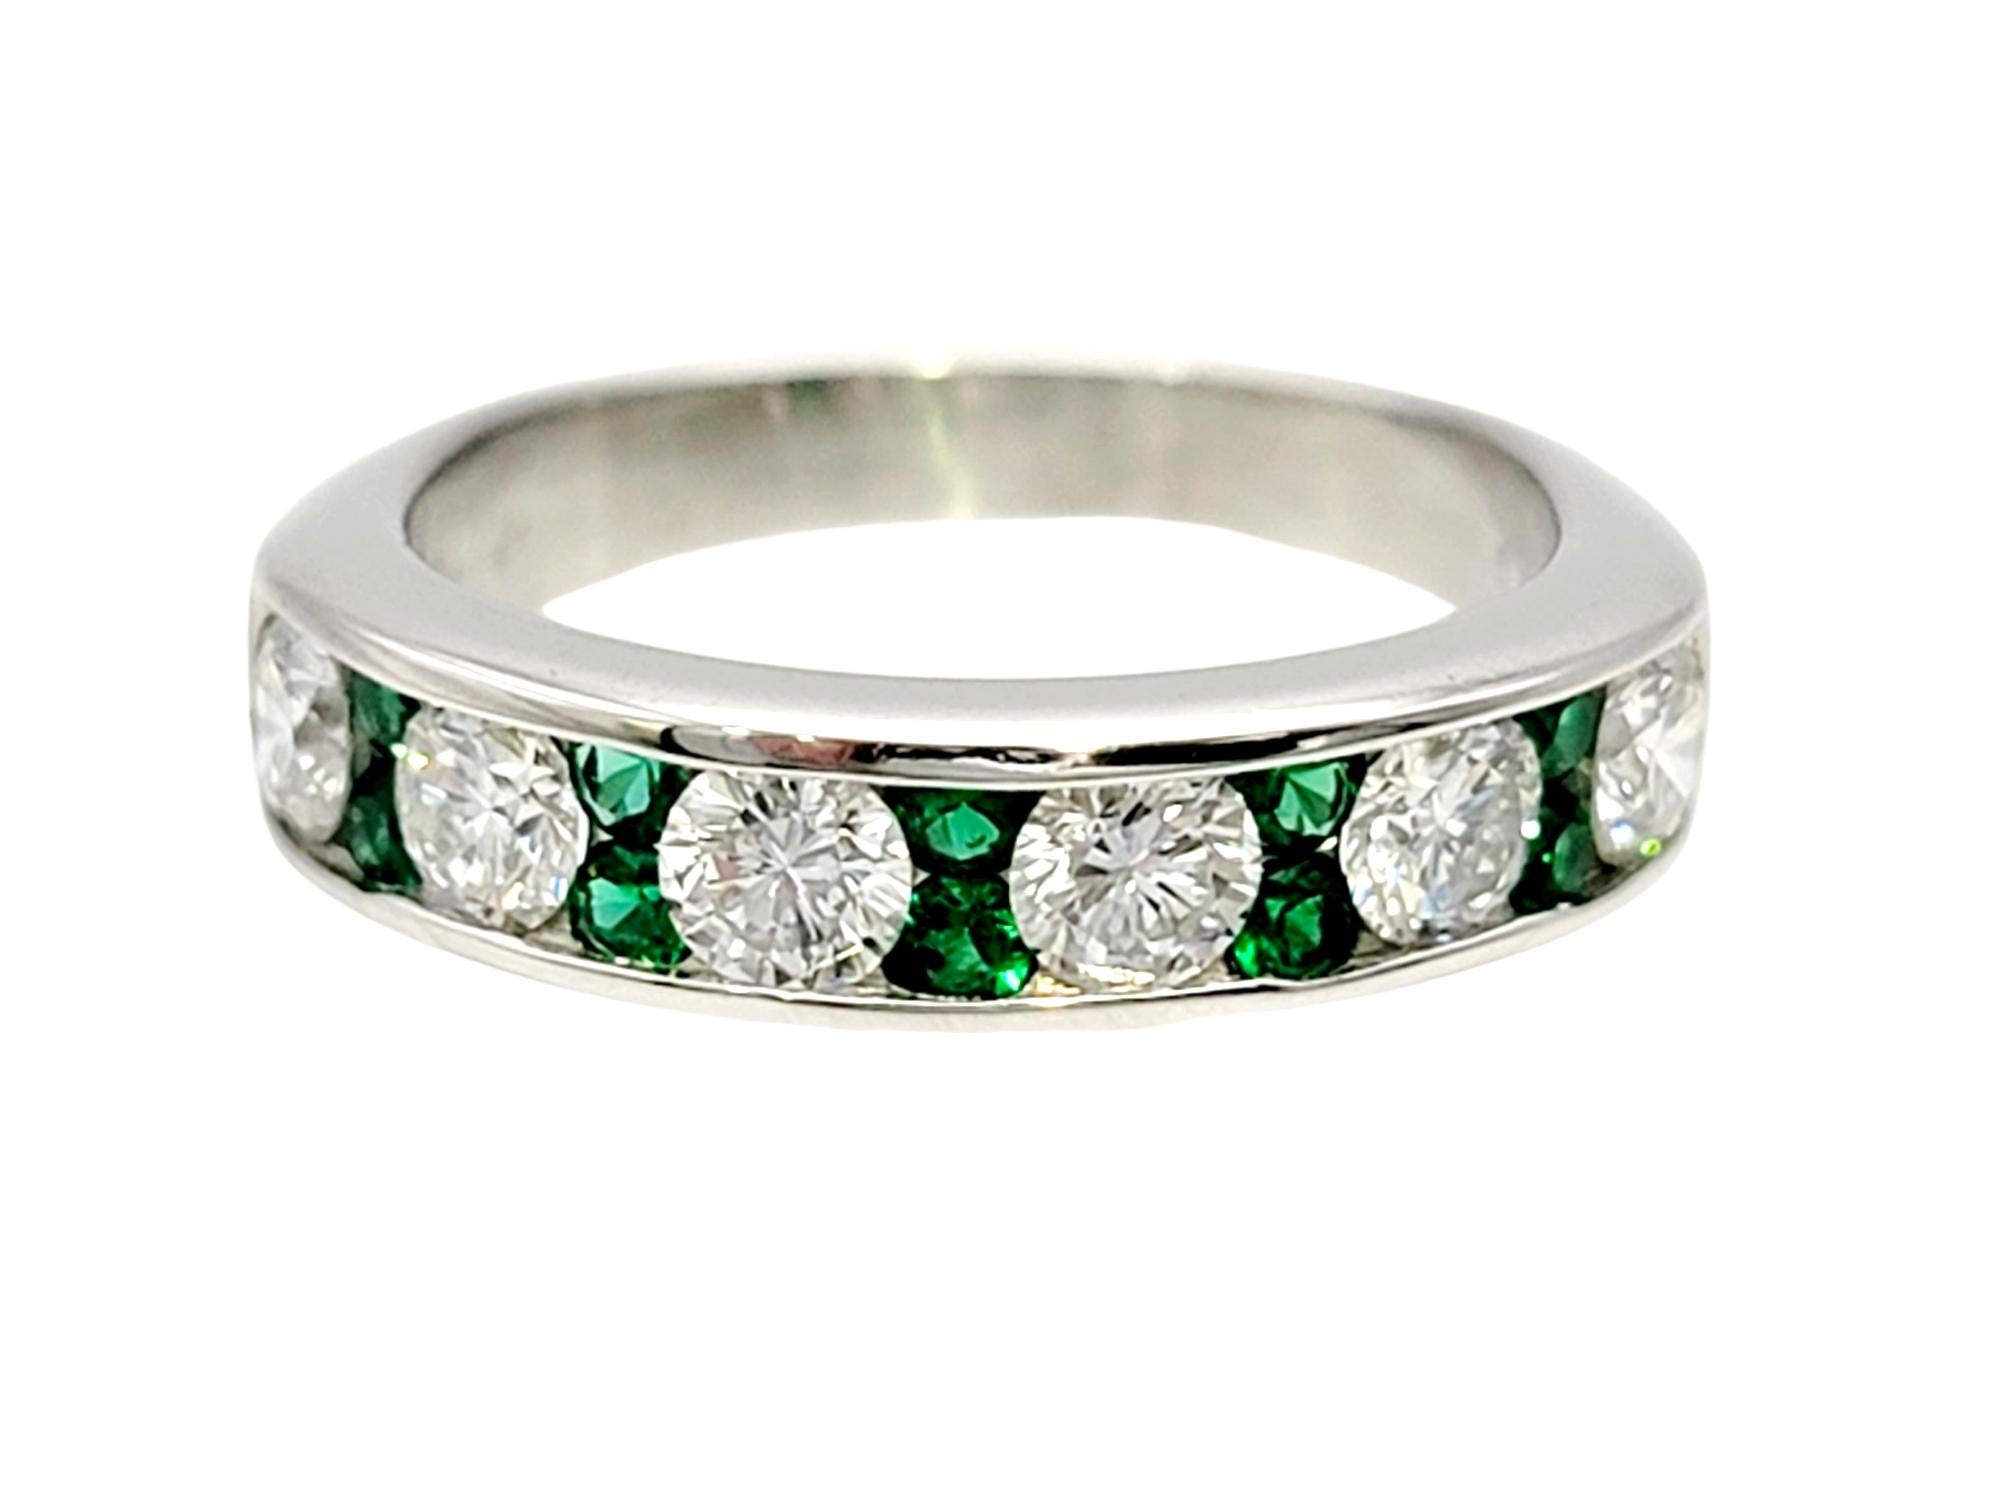 Ring size: 5

Bright and beautiful semi-eternity ring crafted in lustrous platinum. This sparkling ring features a breathtaking combination of radiant white diamonds and vibrant green emeralds, creating a stunning visual feast for the eyes.

The